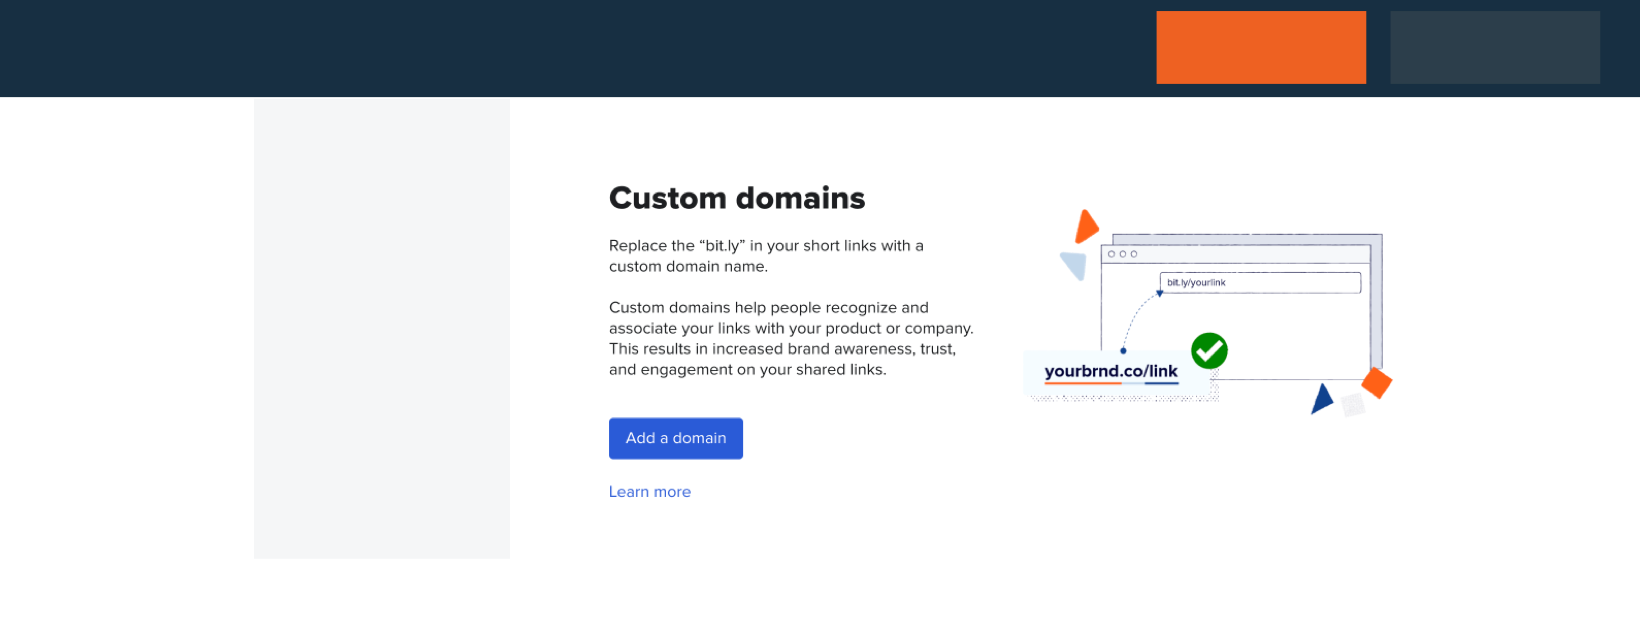 First step of the new custom domain workflow